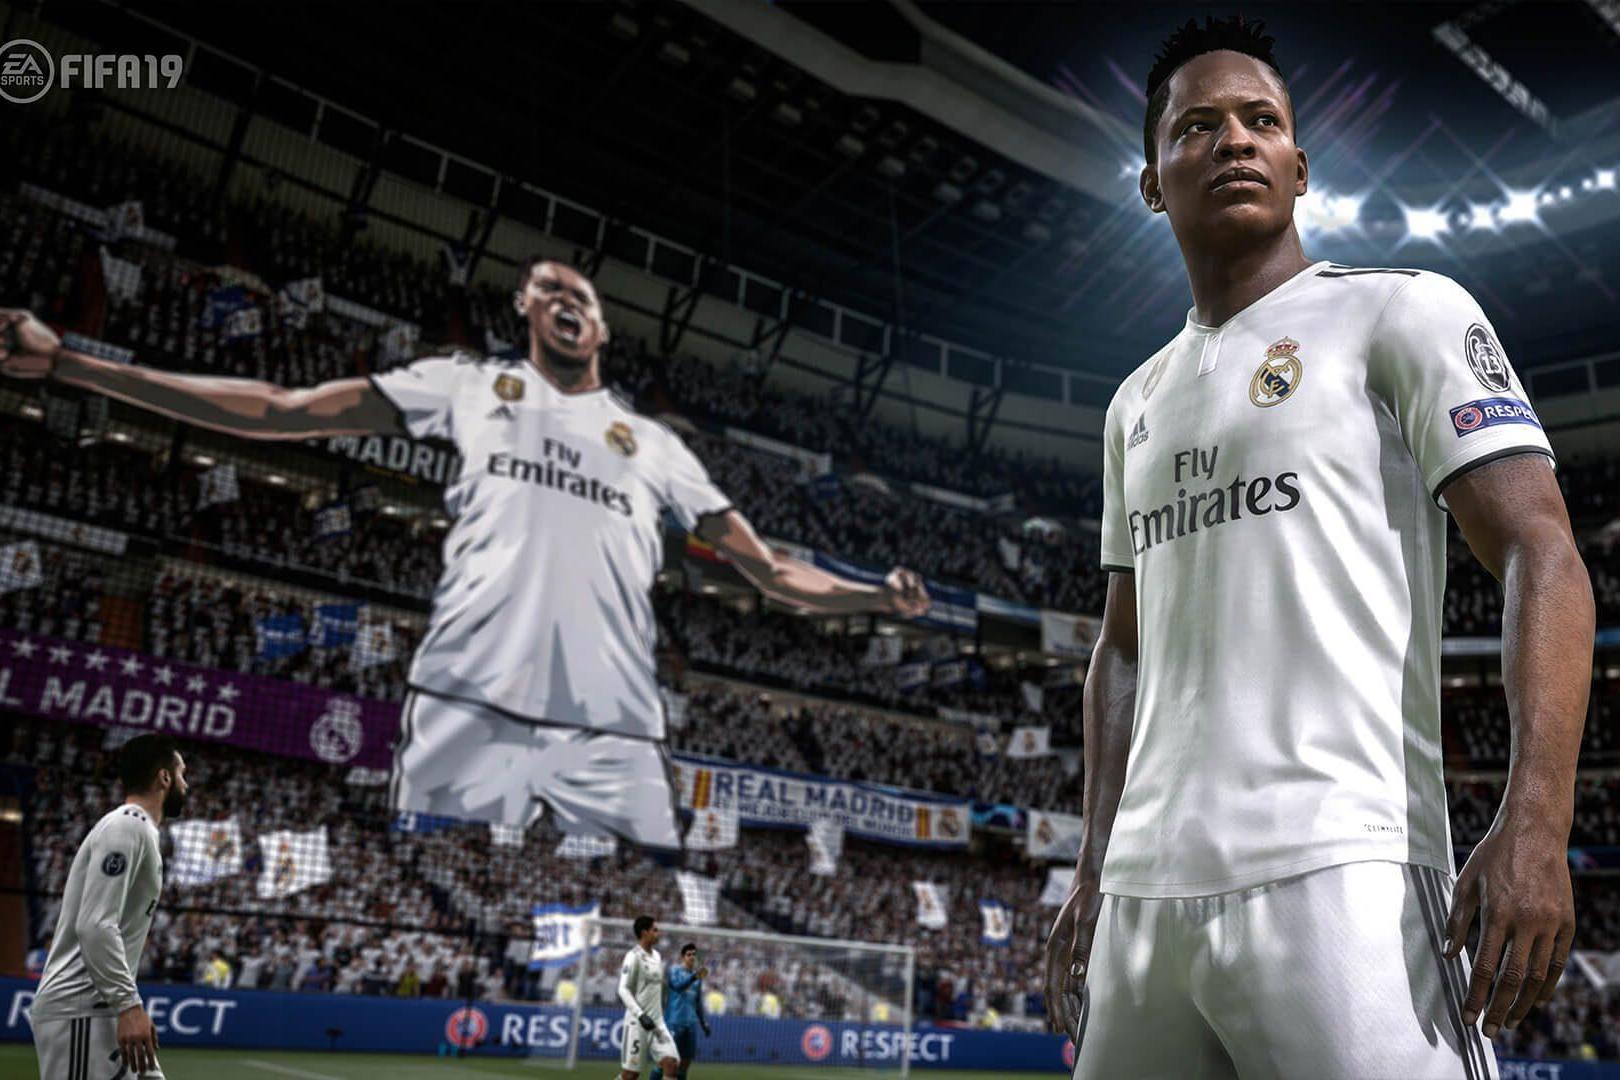 Fifa 19 preview